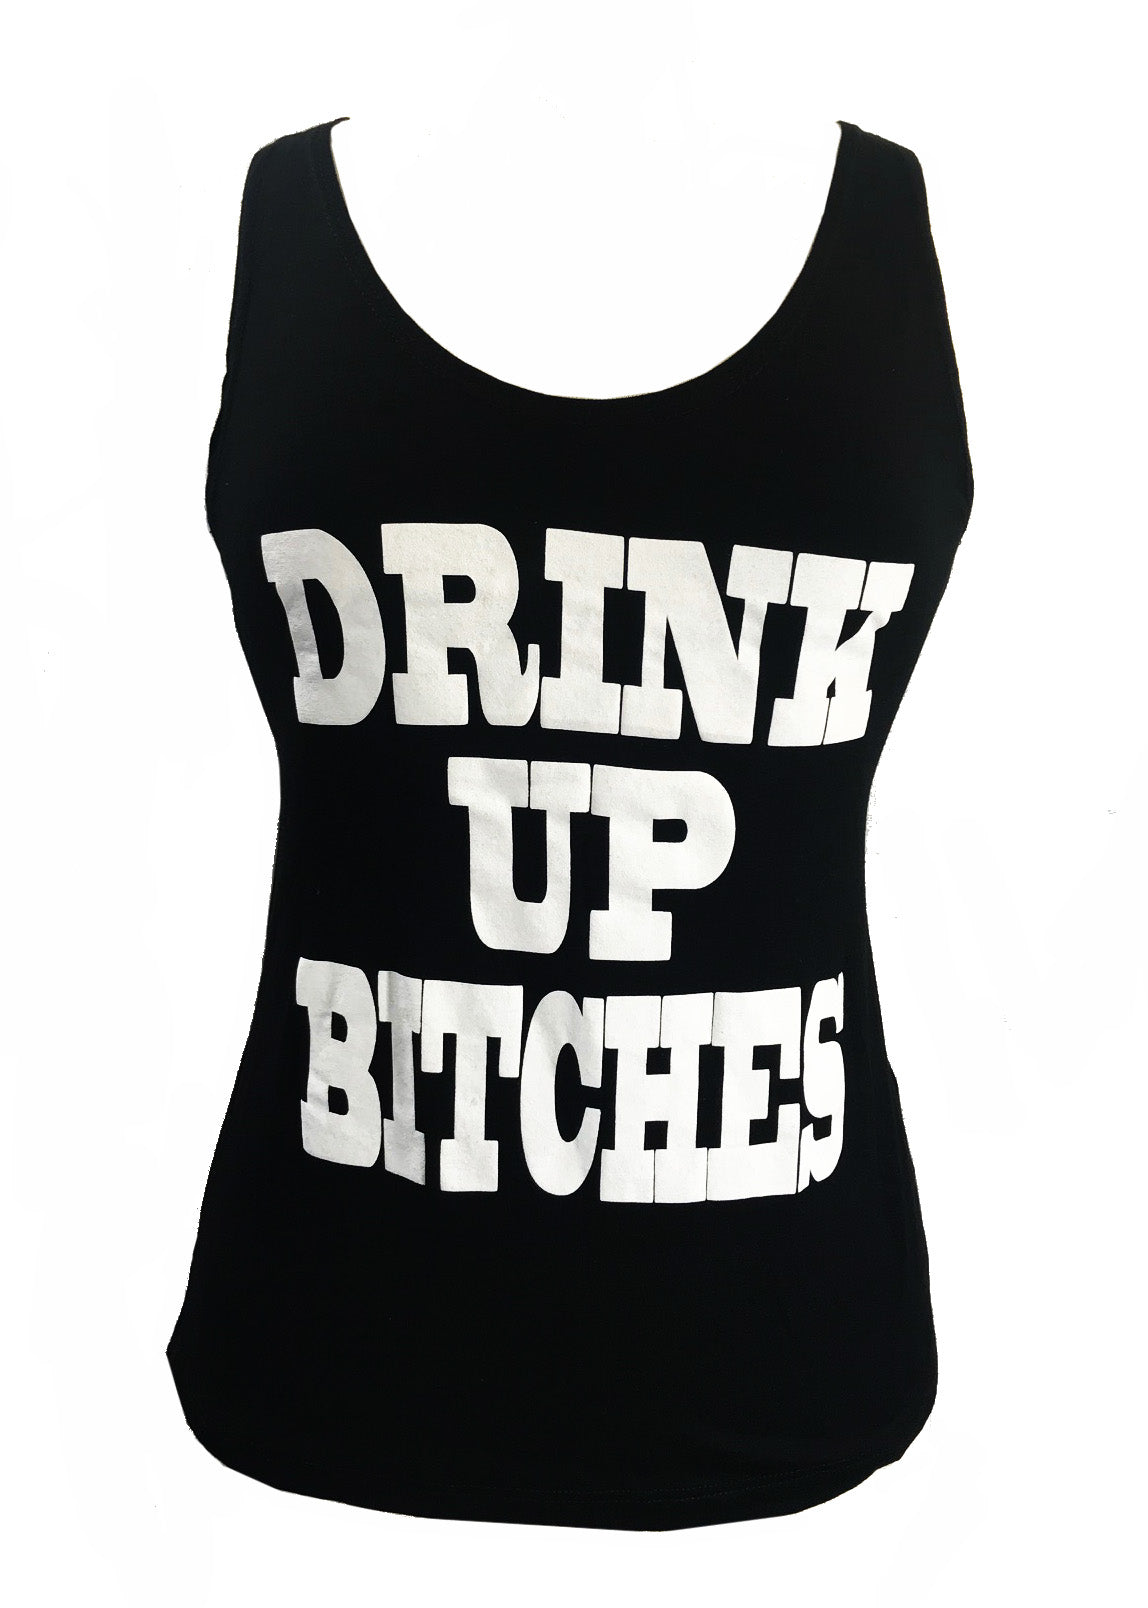 DRINK UP BITCHES TANK TOP + free gift - Trailsclothing.com